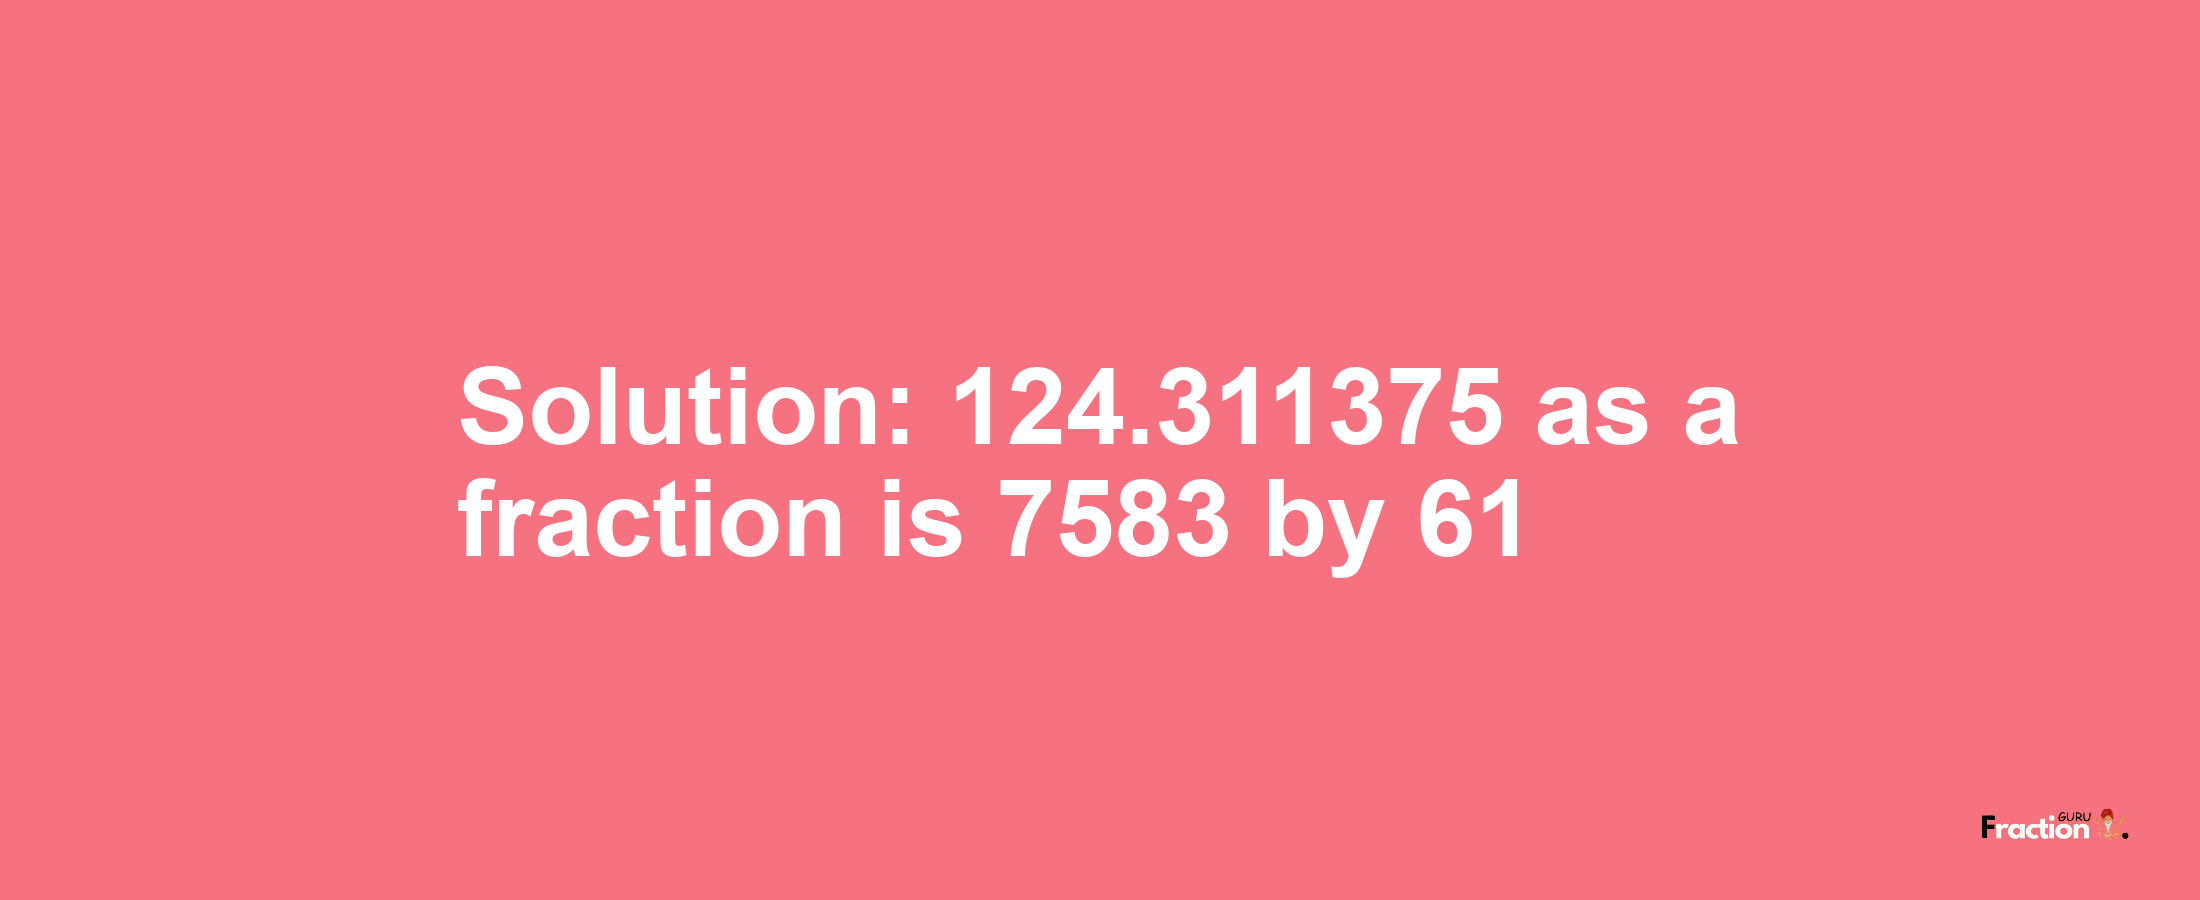 Solution:124.311375 as a fraction is 7583/61